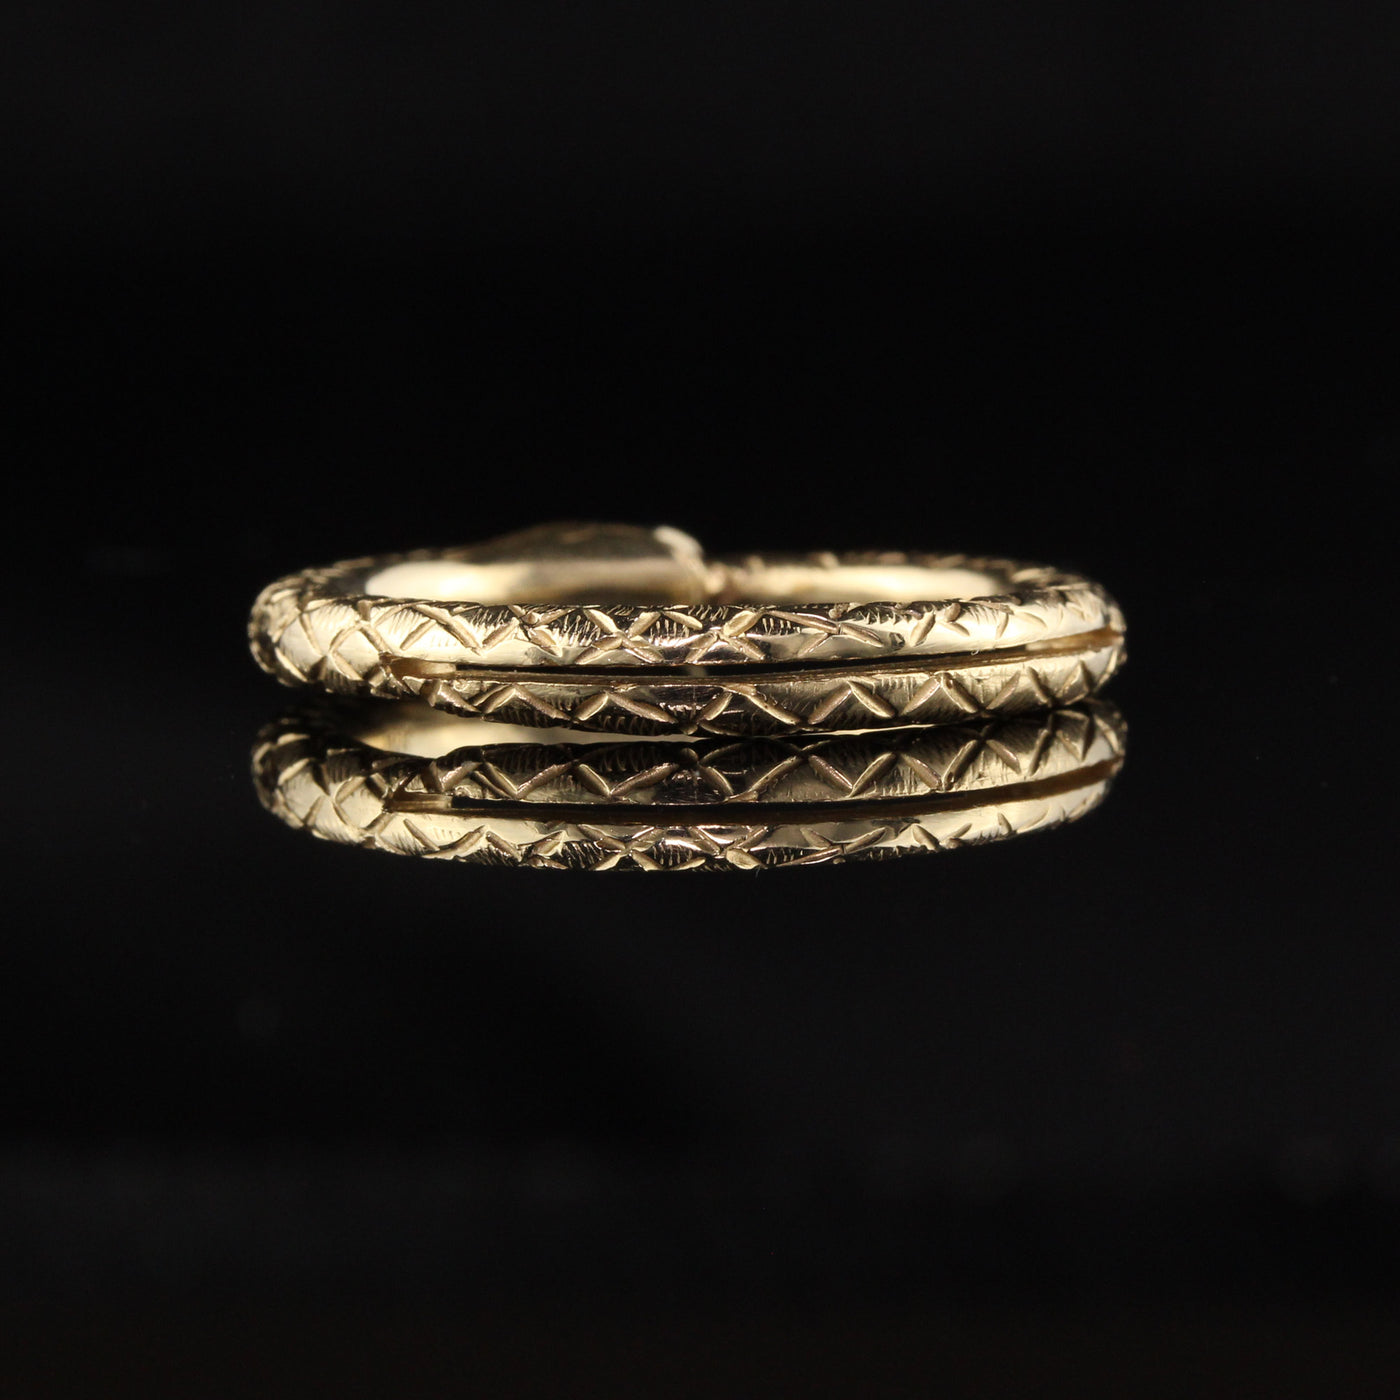 Antique Victorian 14K Yellow Gold Ruby Snake Ring